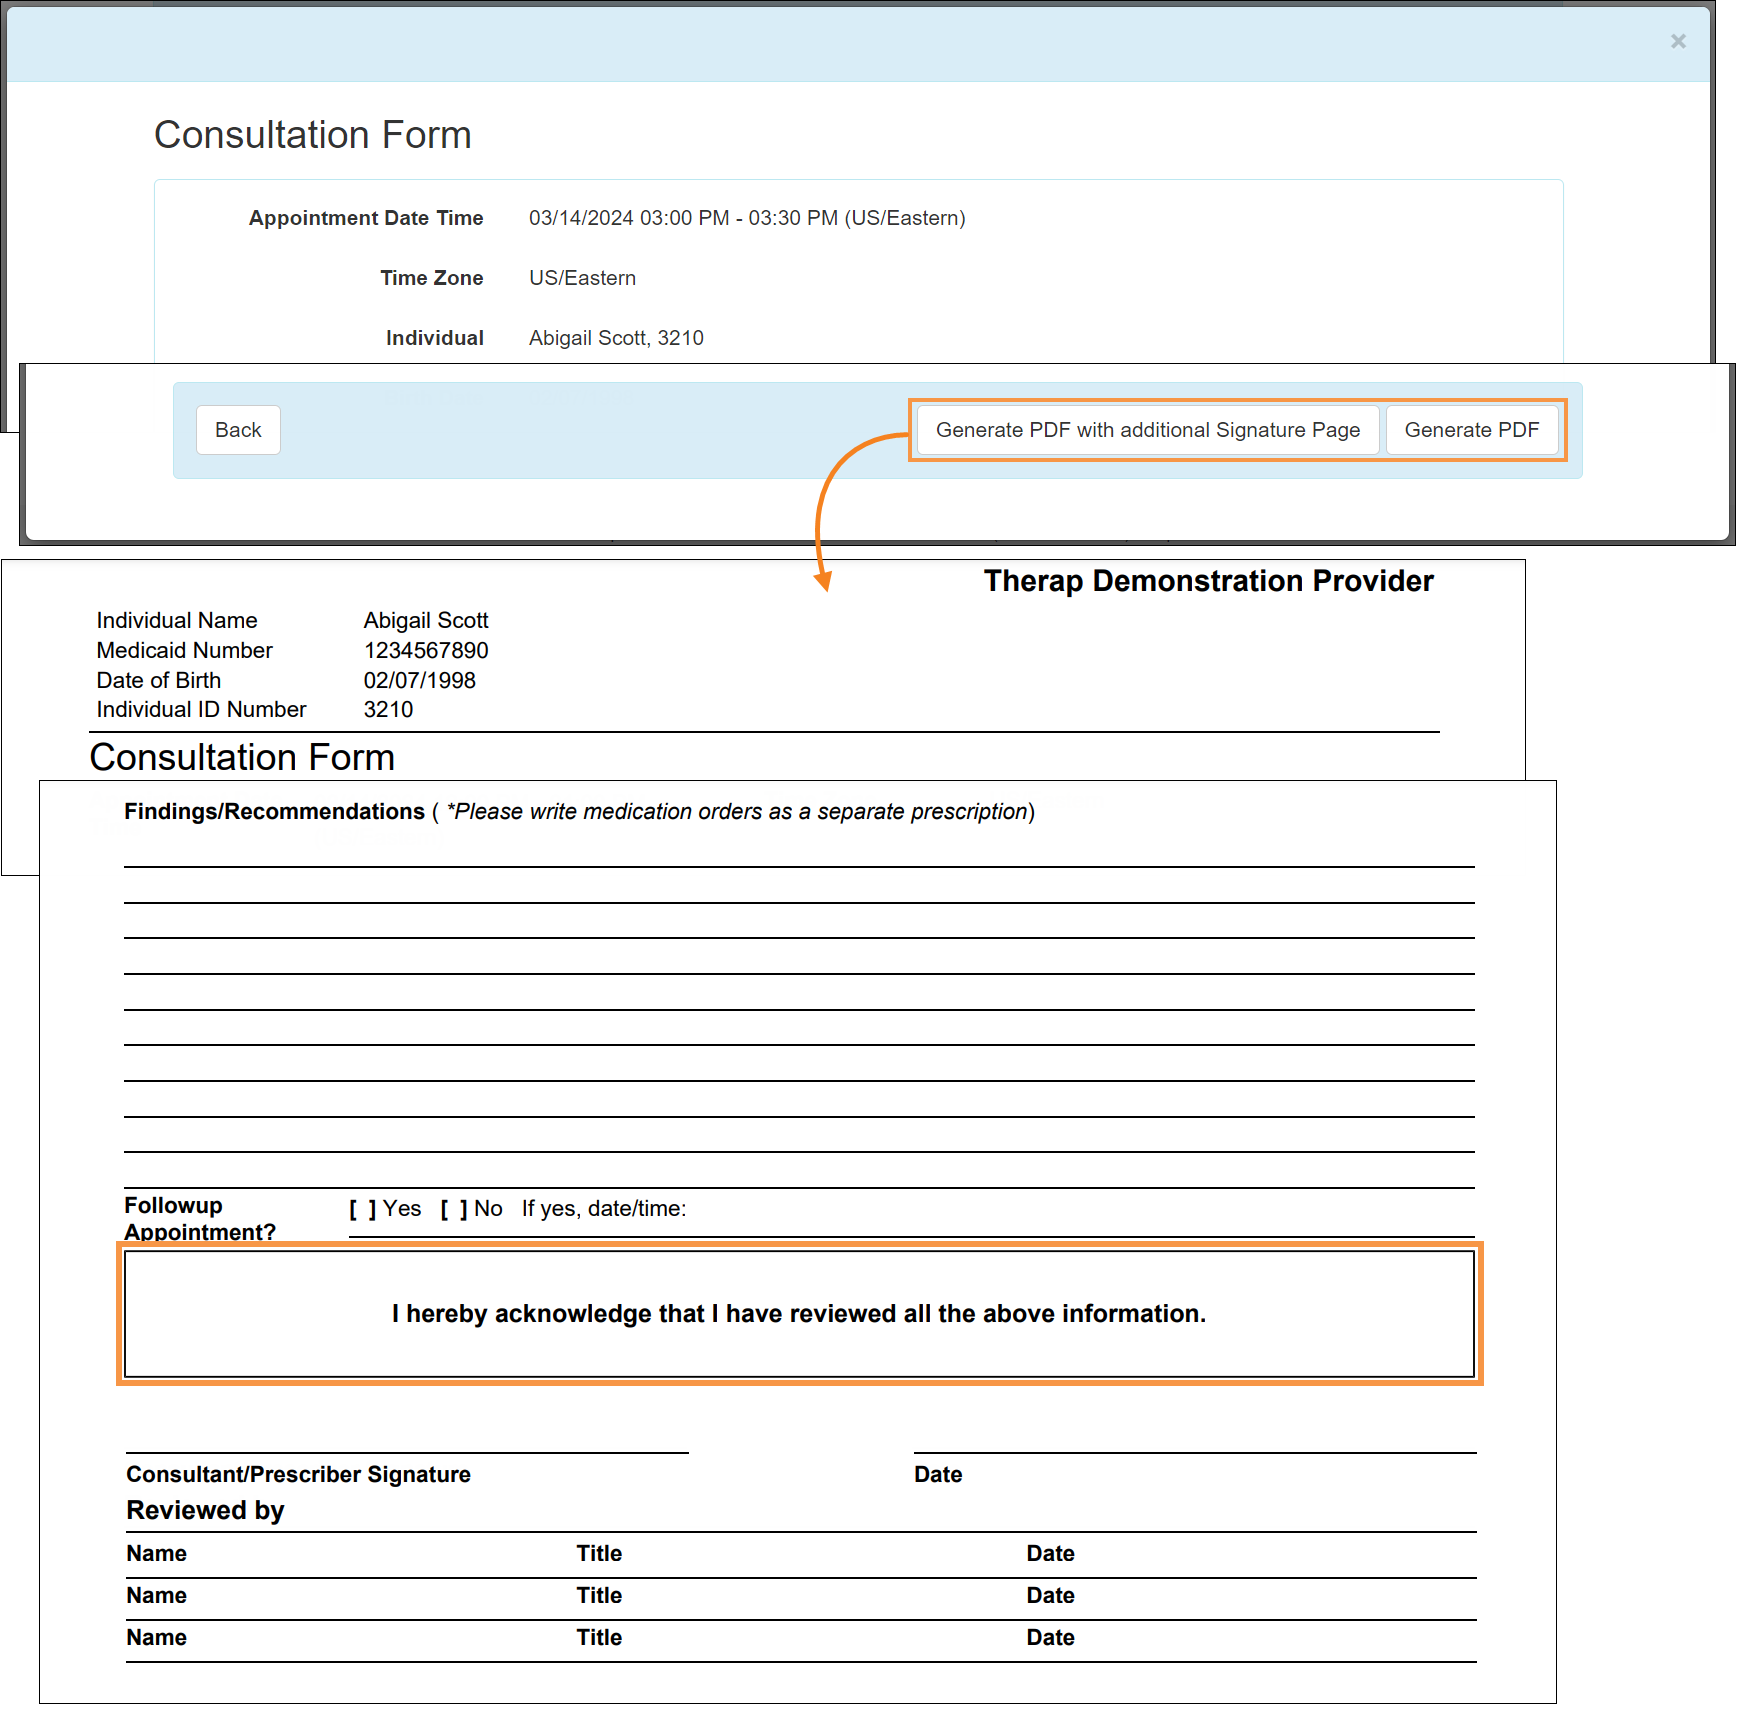 Screenshot showing PCM section in Consultation Form PDF.